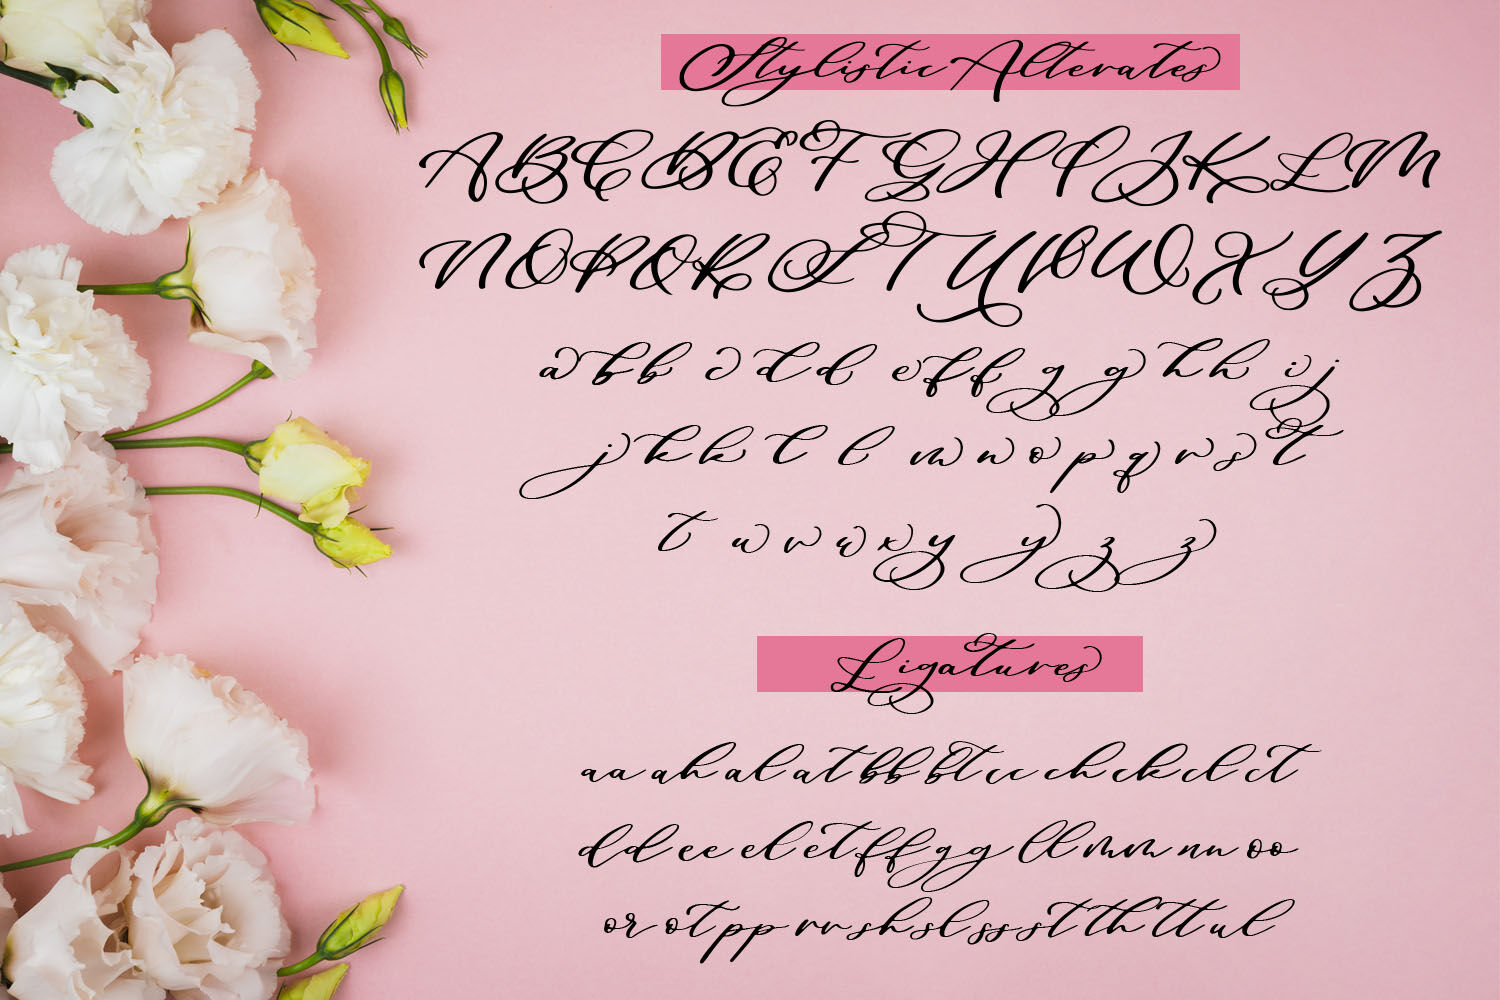 Maid Of Honor A Script Font With Matching Doodles By Freeling Design House Thehungryjpeg Com